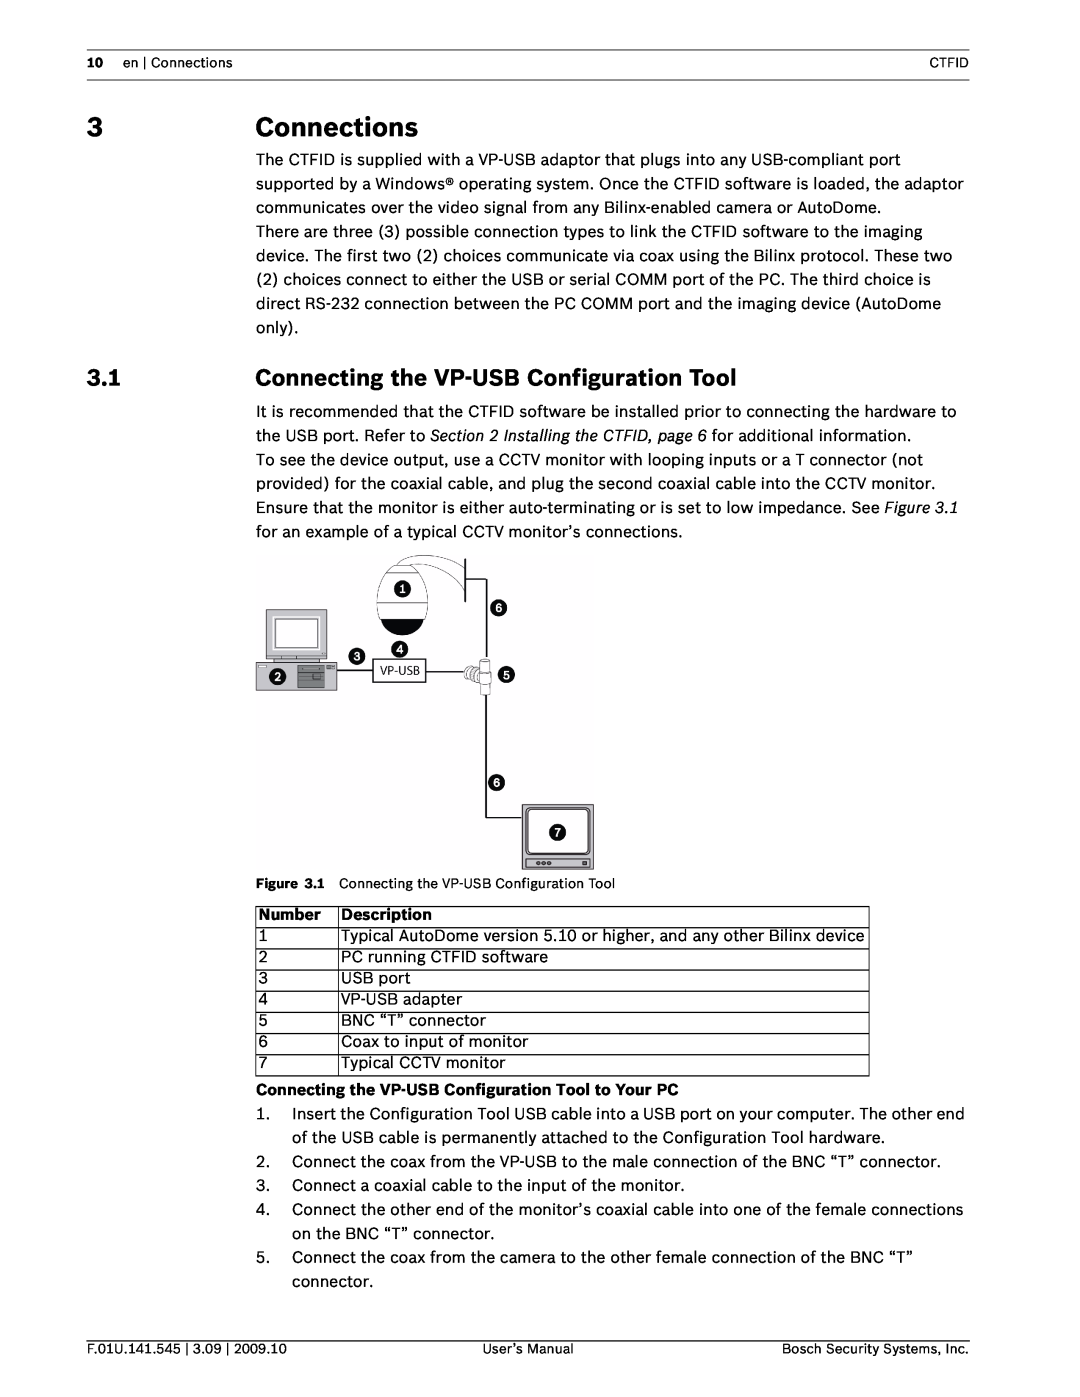 Bosch Appliances VP-CFGSFT user manual 3Connections, 3.1Connecting the VP-USBConfiguration Tool 